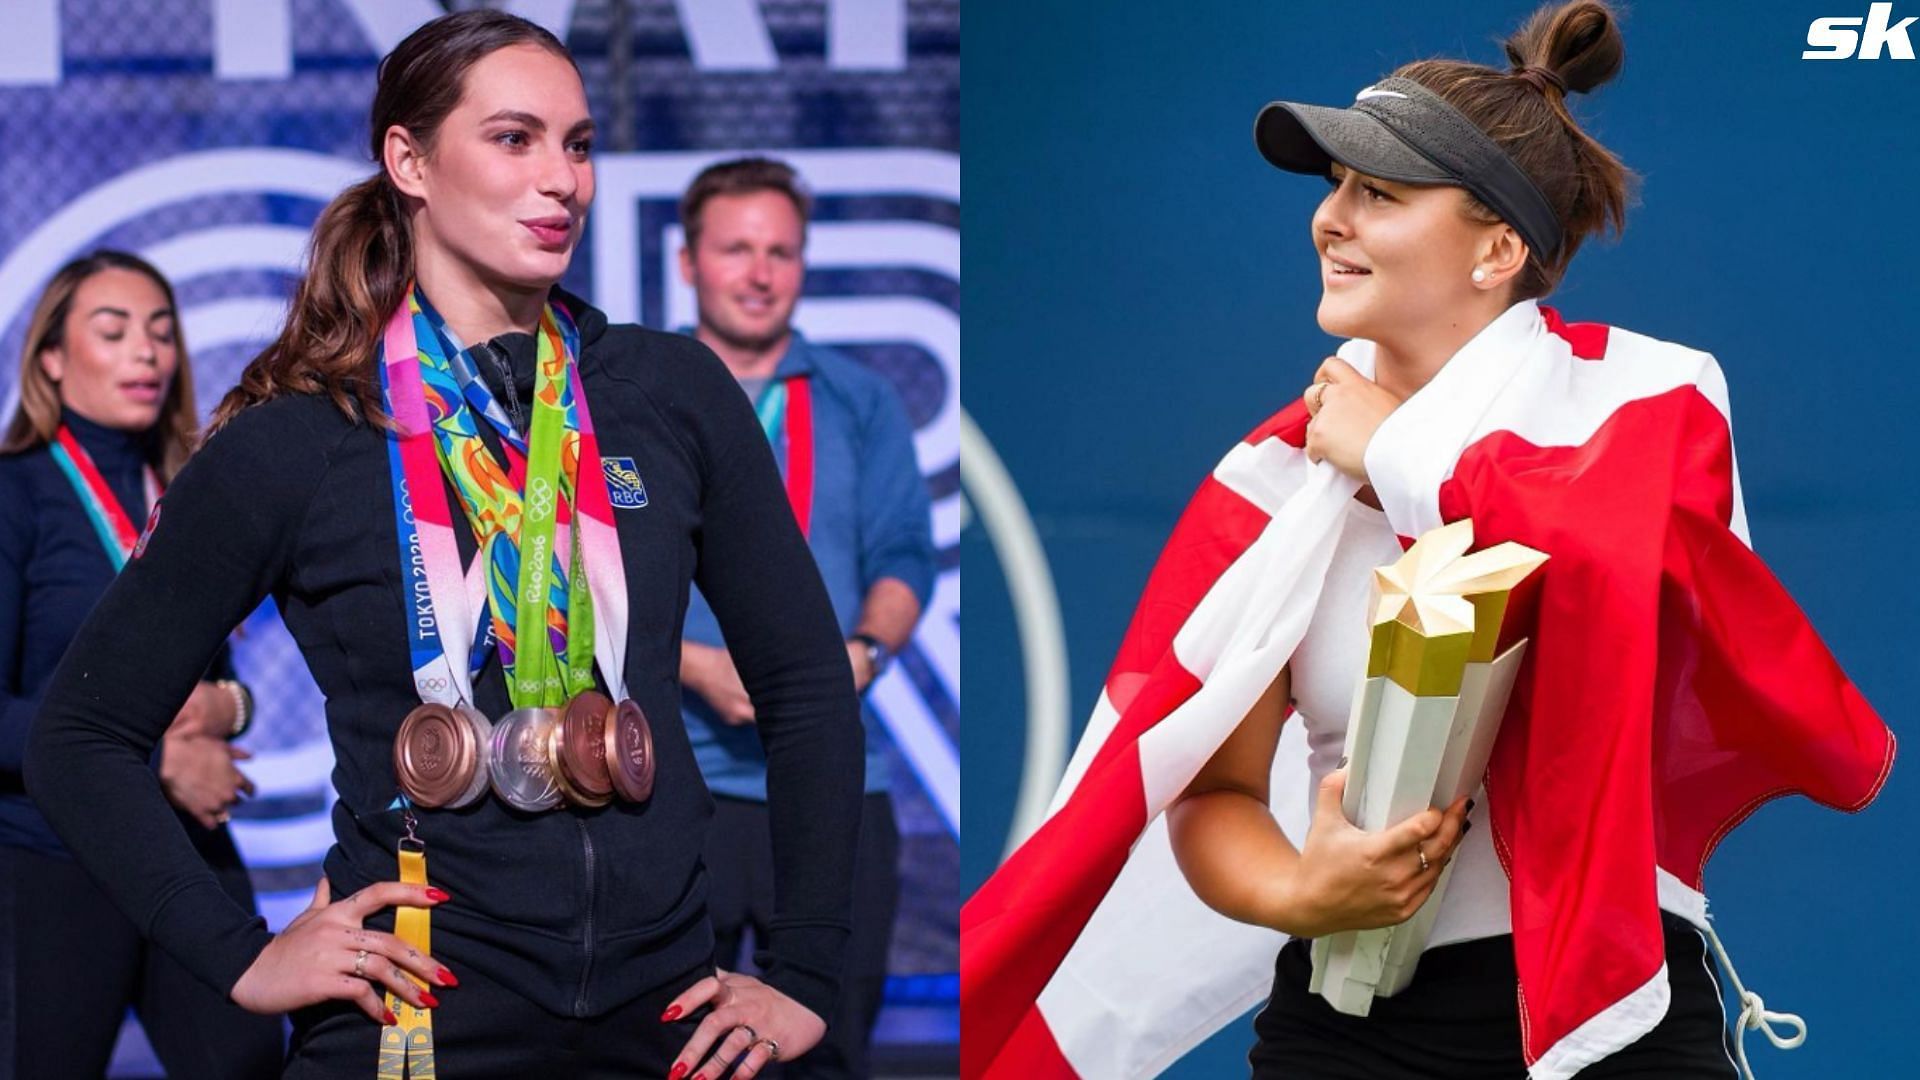 'Queen' Bianca Andreescu in high spirits after reuniting with Canada's most-decorated Olympian Penny Oleksiak at Paris Olympics 2024